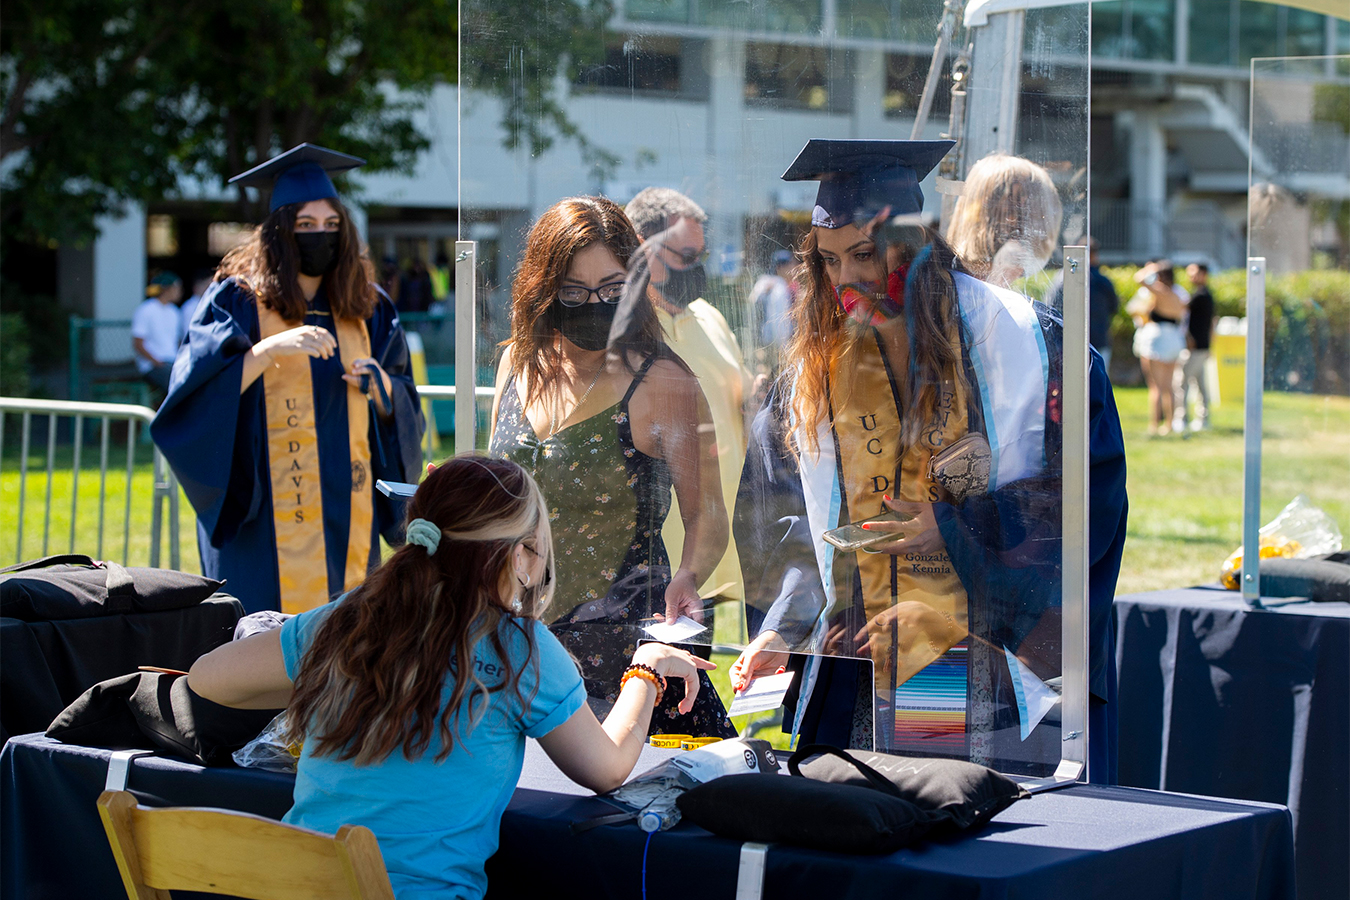 Two women hold out their vaccine cards to a person at an outdoor booth behind a plastic face shield. The woman on the right is wearing a blue graduation cap and gown, another woman stands to her left, in normal clothes.